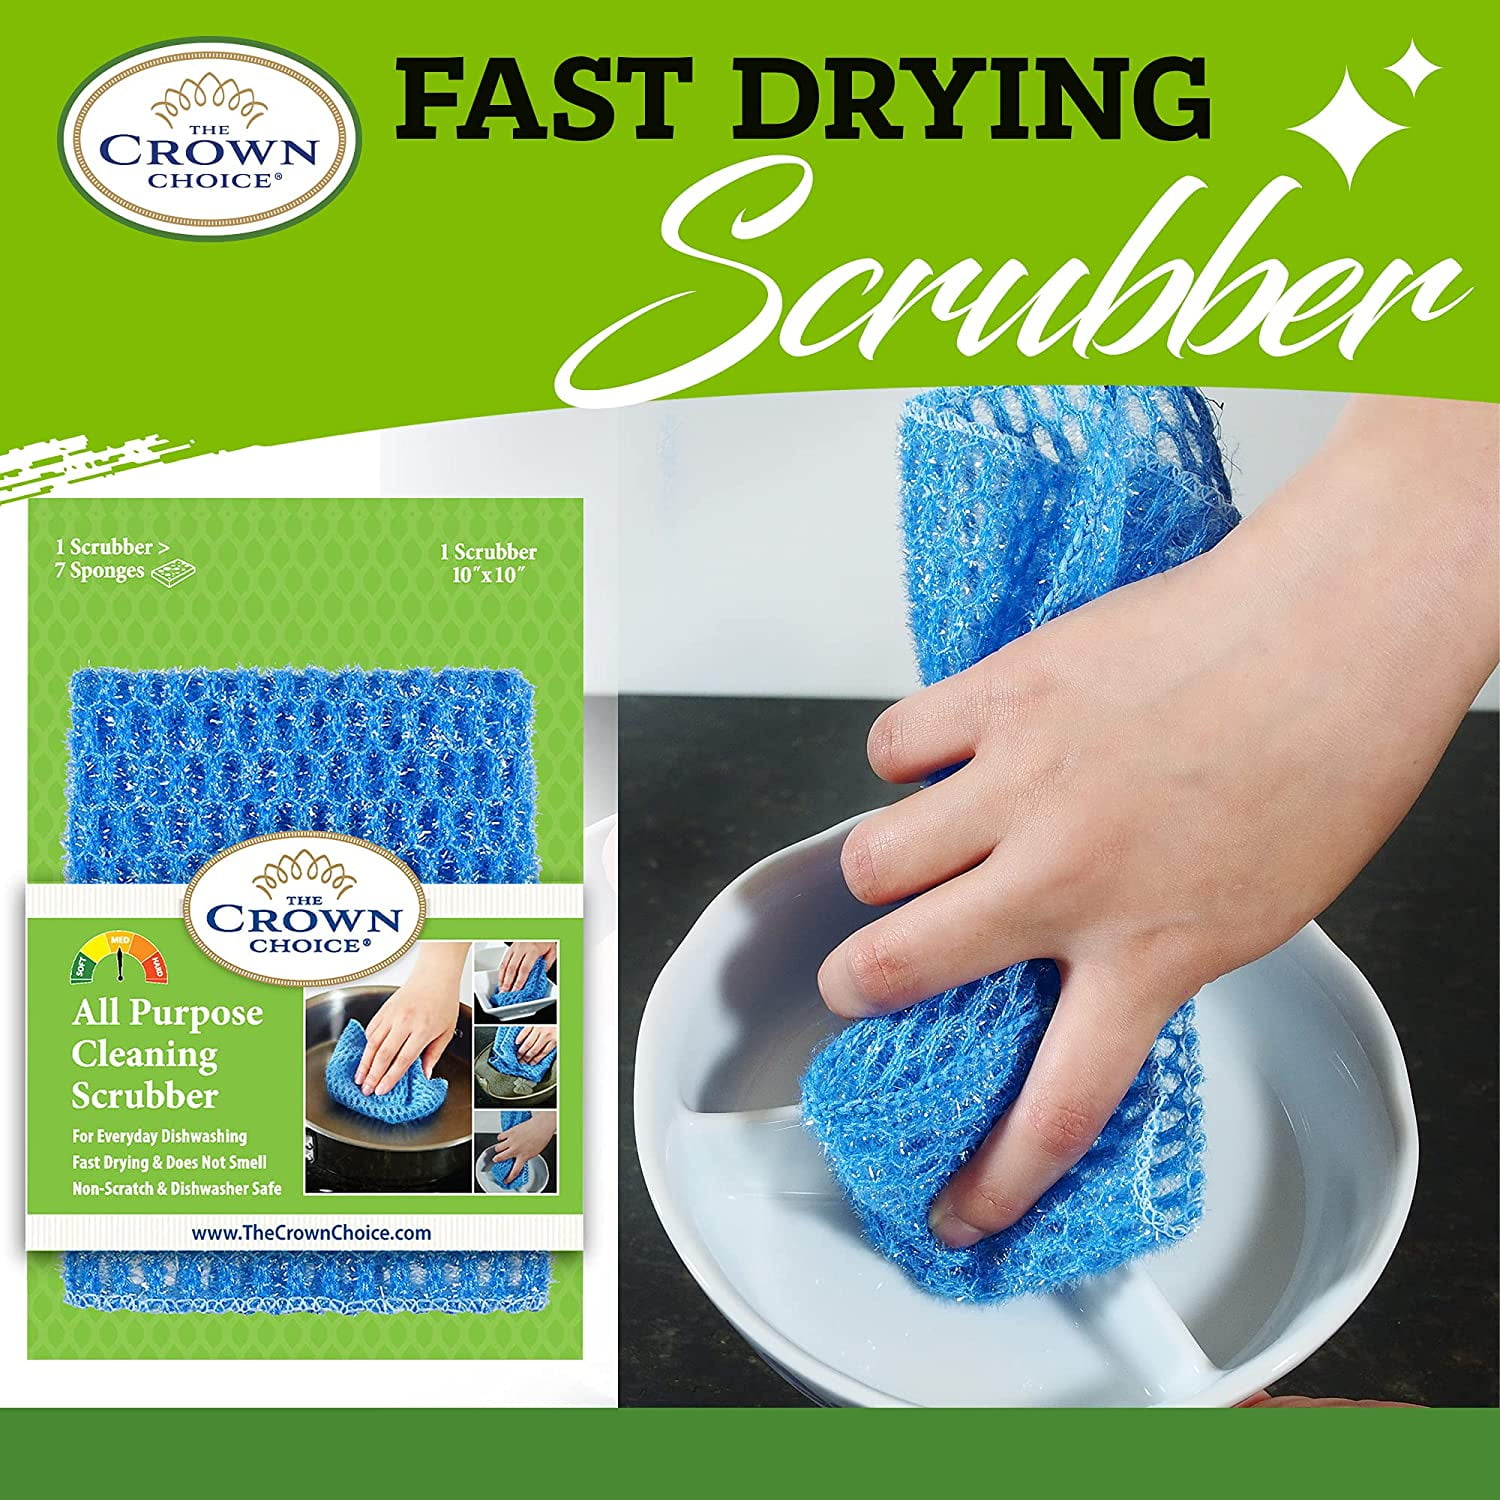 ODOR FREE Scrubbing Pad for Dishwashing and Cleaning | Strong & Scratch  Free Scrubber | VERY Durable and Tough Scrub Sponge | No Mildew Smell from